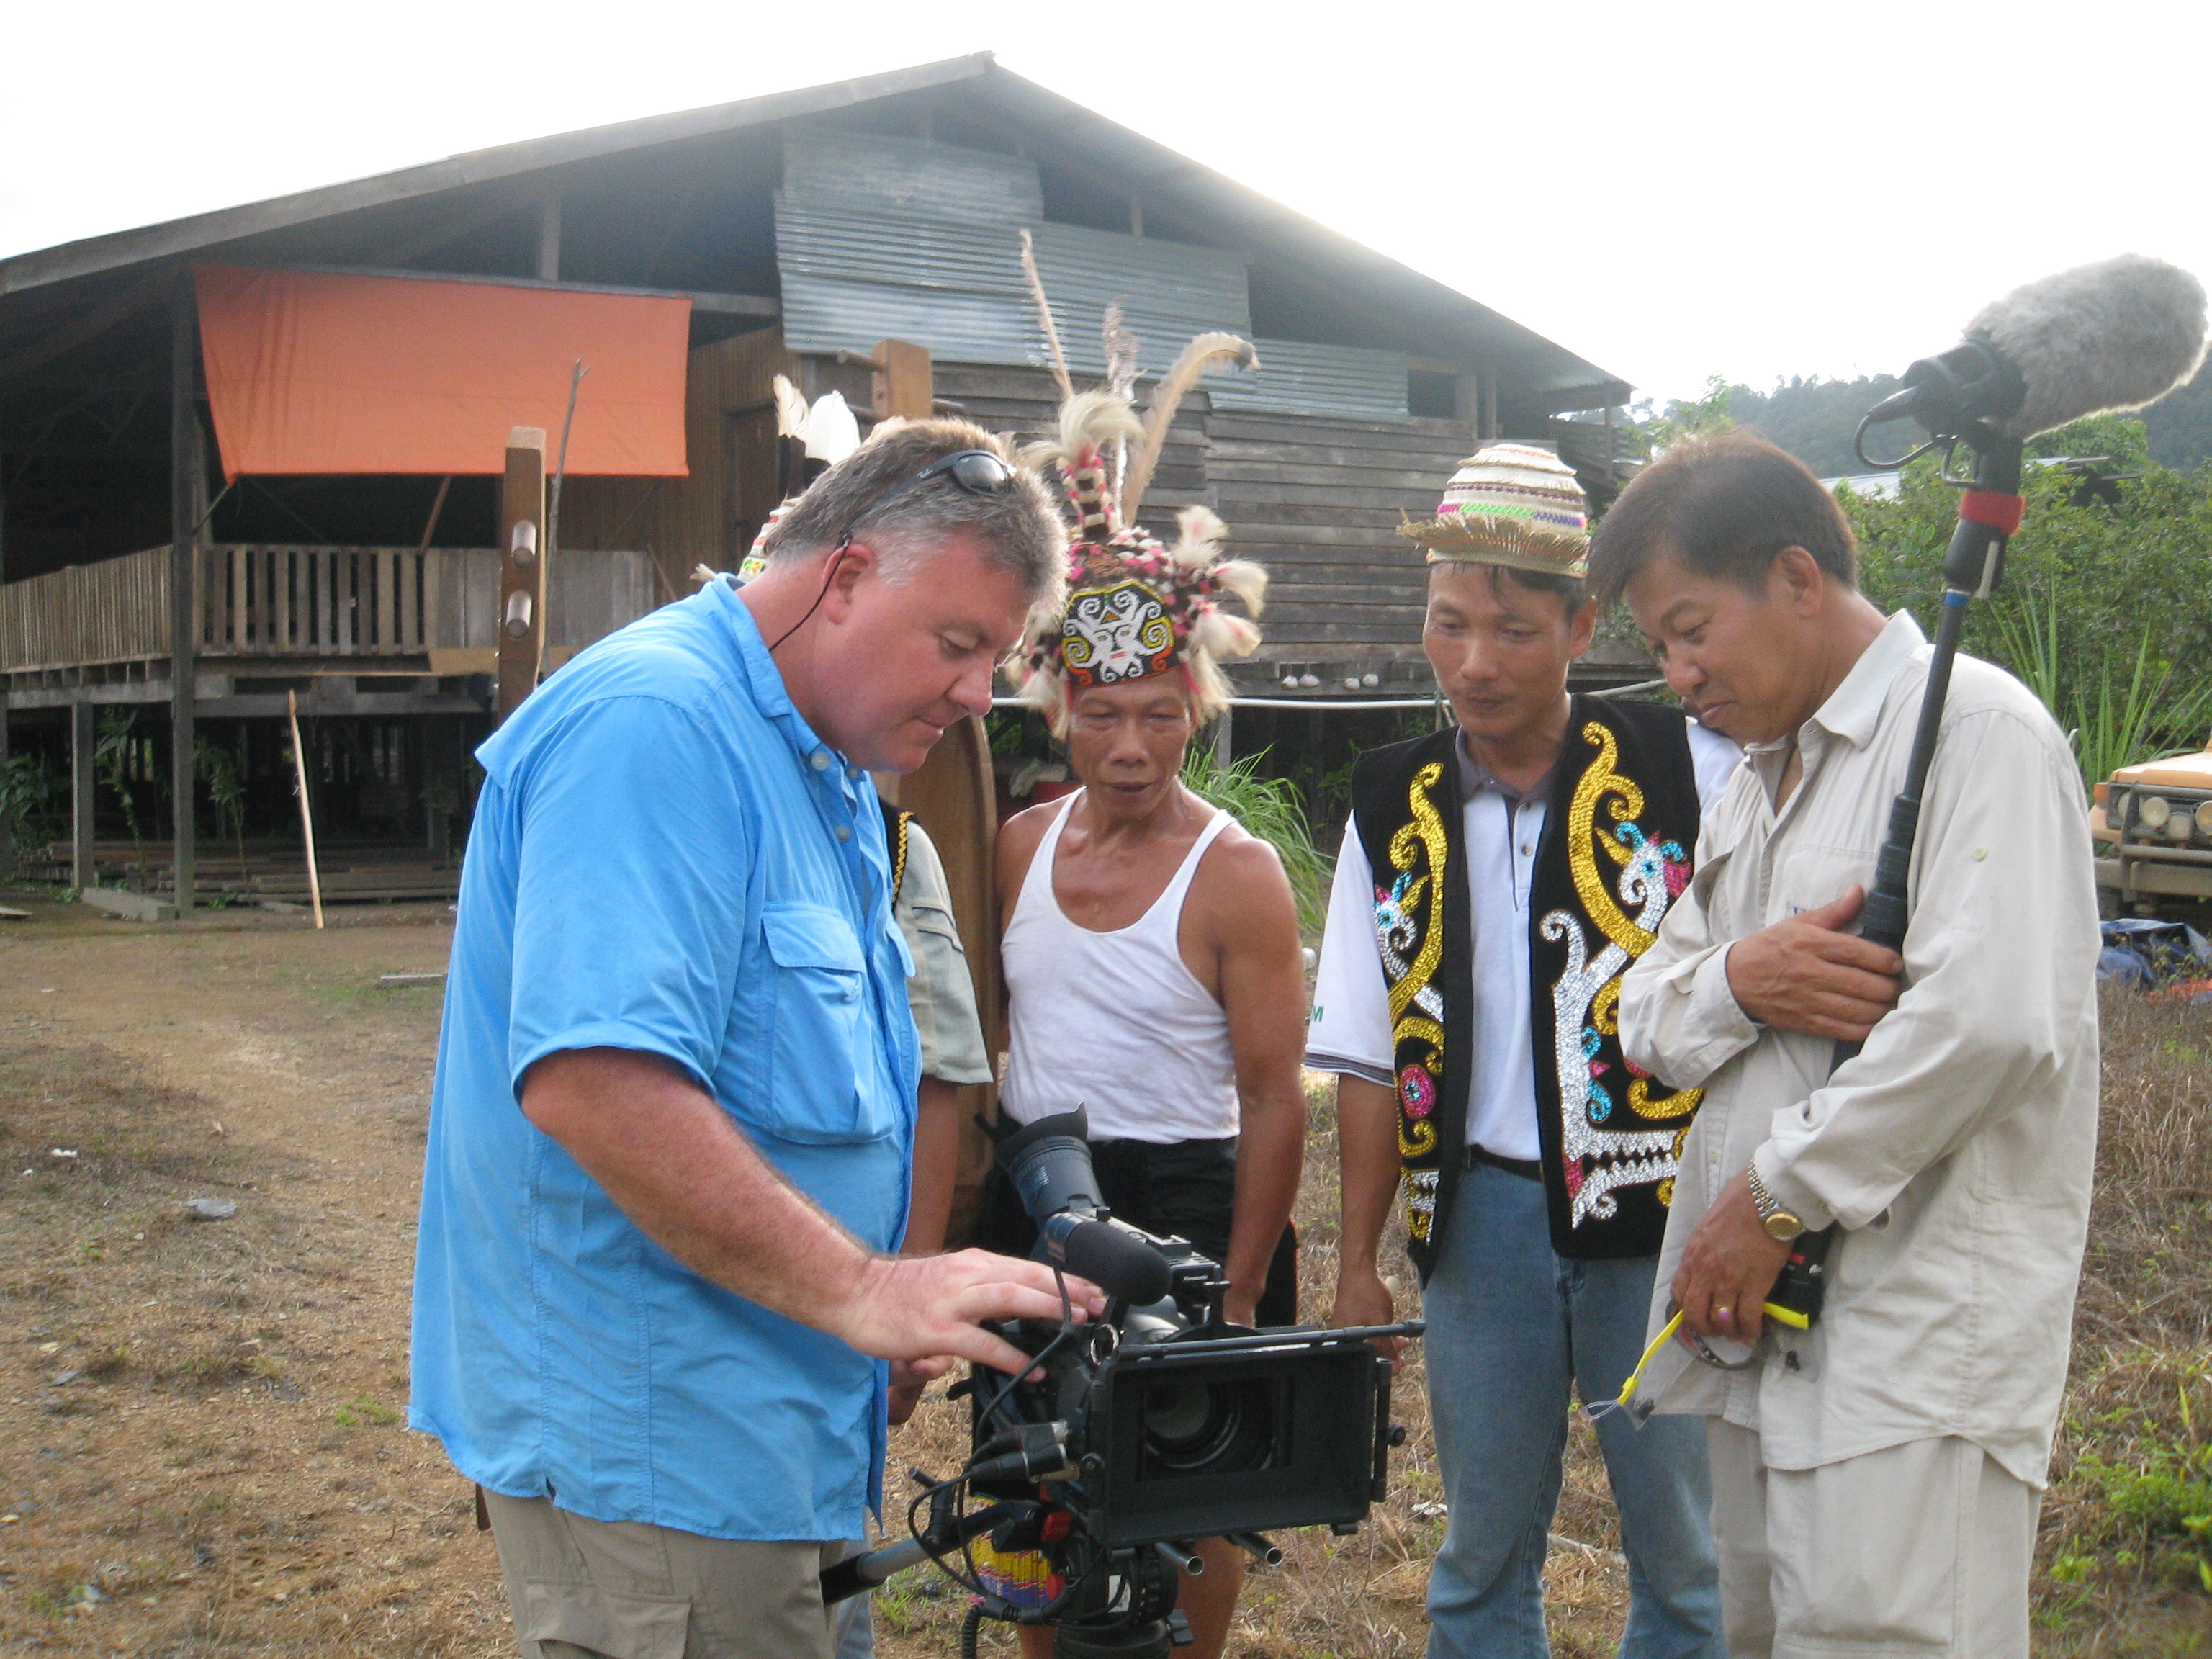 replaying footage to the villagers in Sarawak jungle, Malaysia